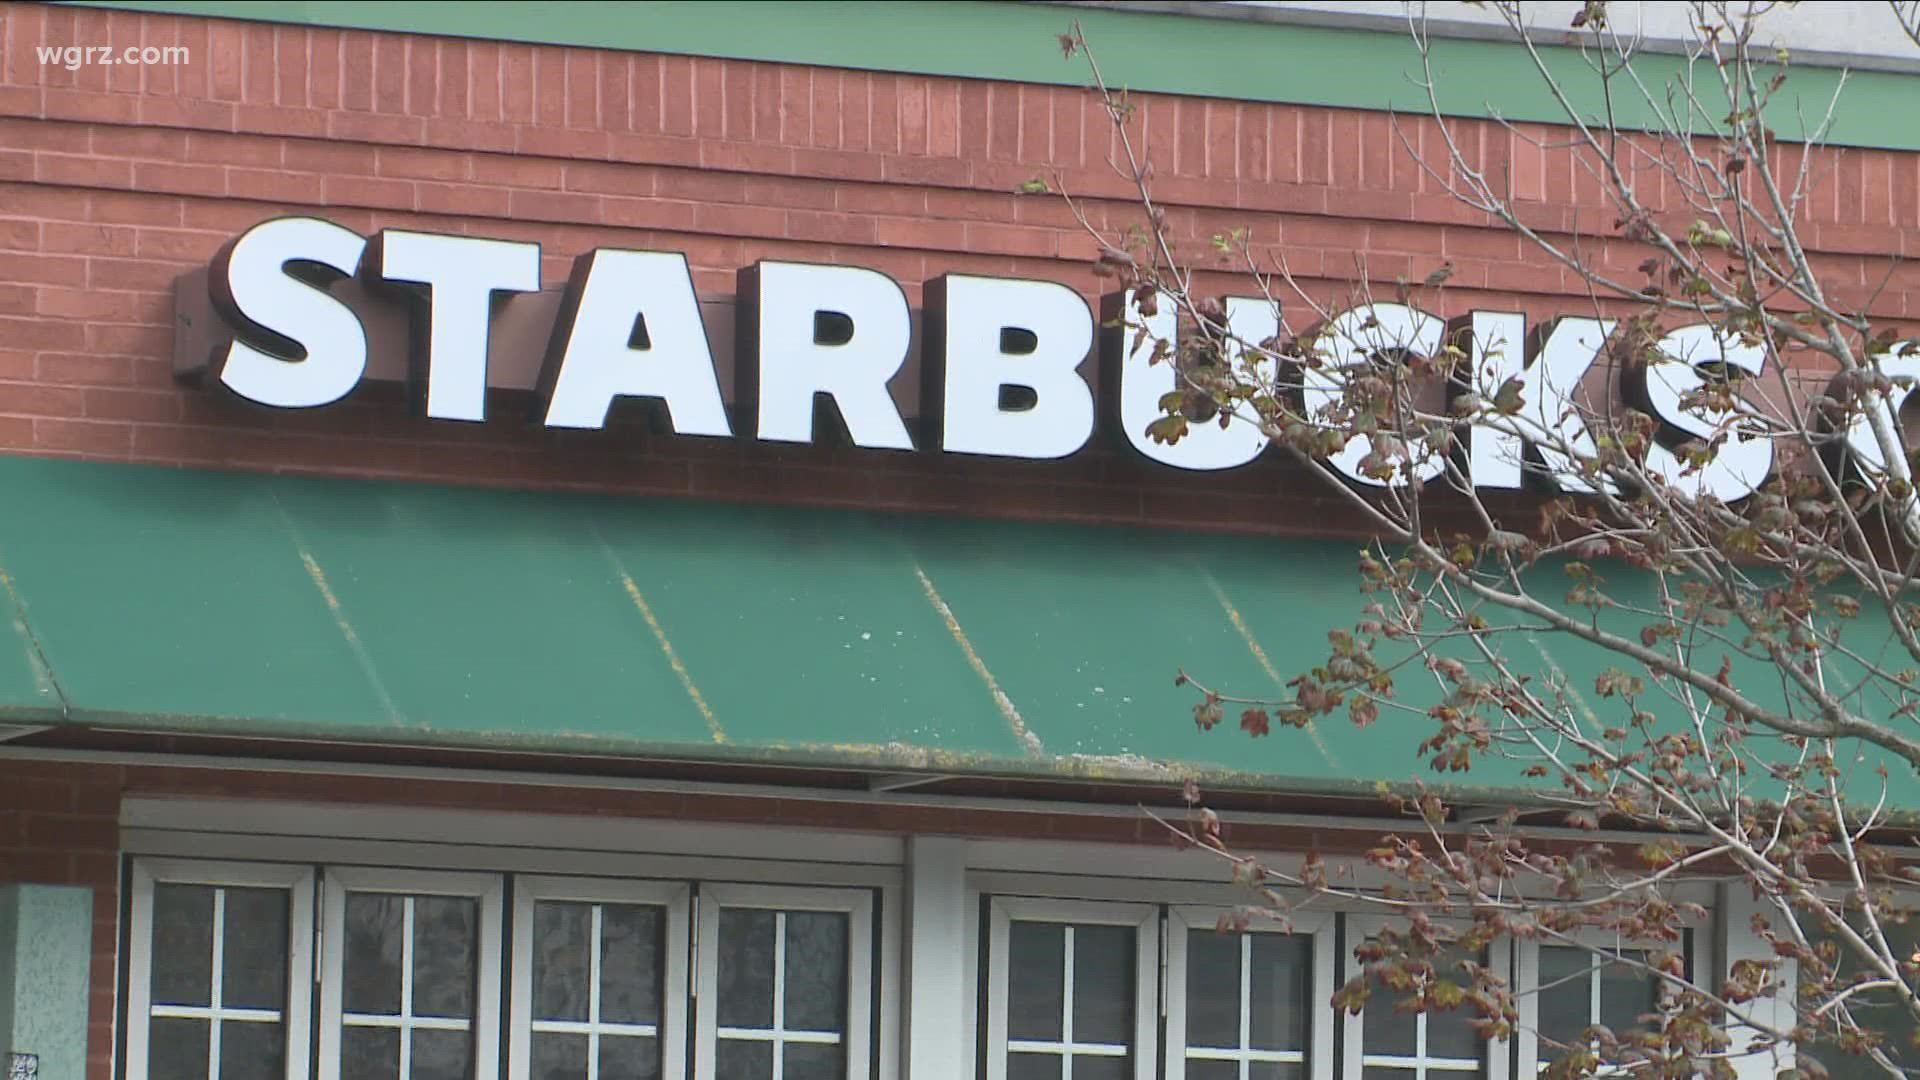 The unionizing effort led by Buffalo starbucks workers is gaining support from local officials.